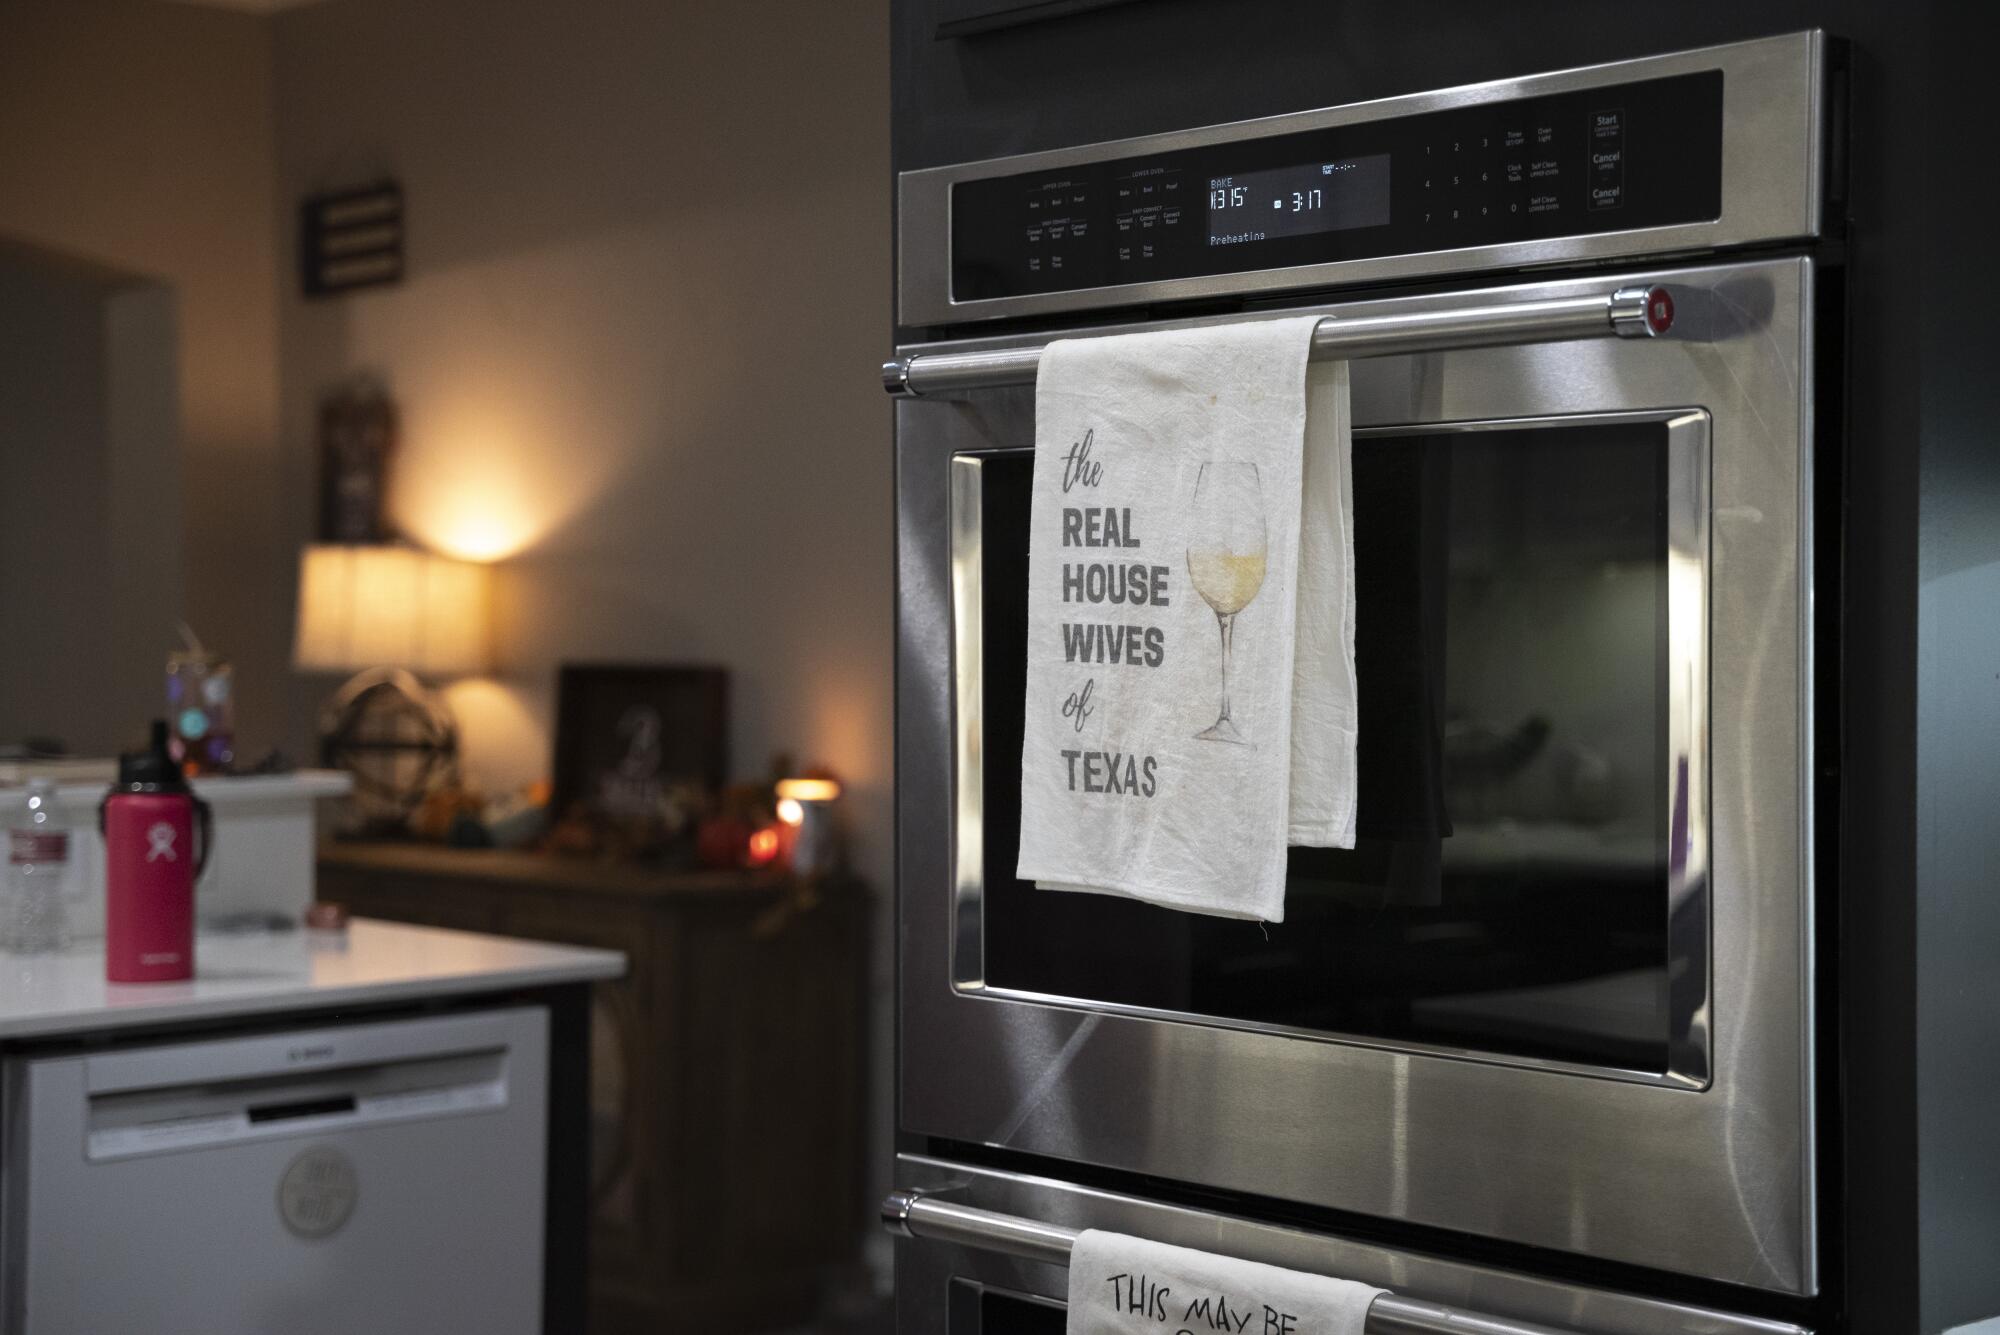 An oven with a kitchen towel hanging from its door.